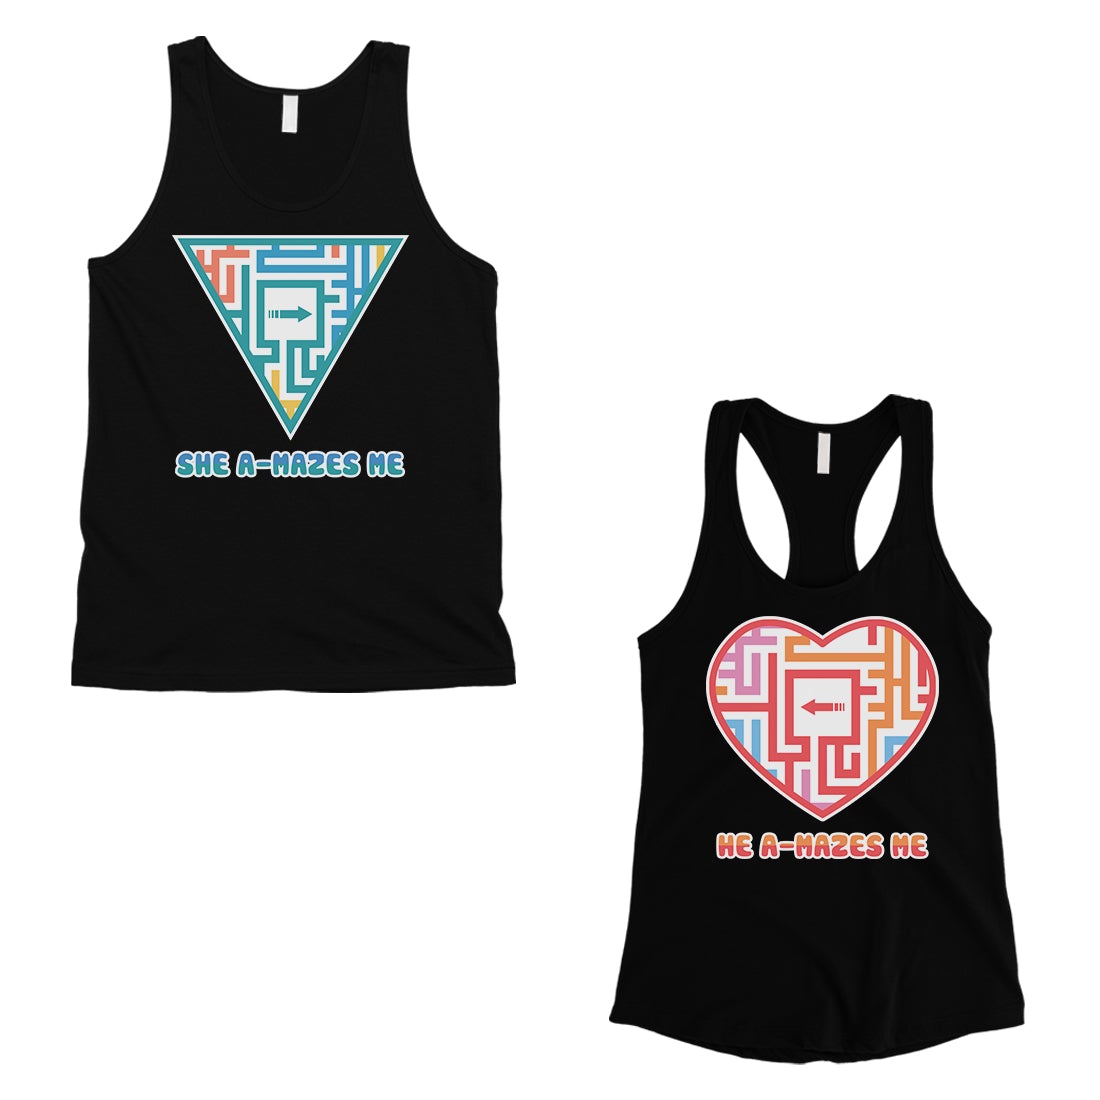 A-Mazes Me Matching Tank Tops For Couples